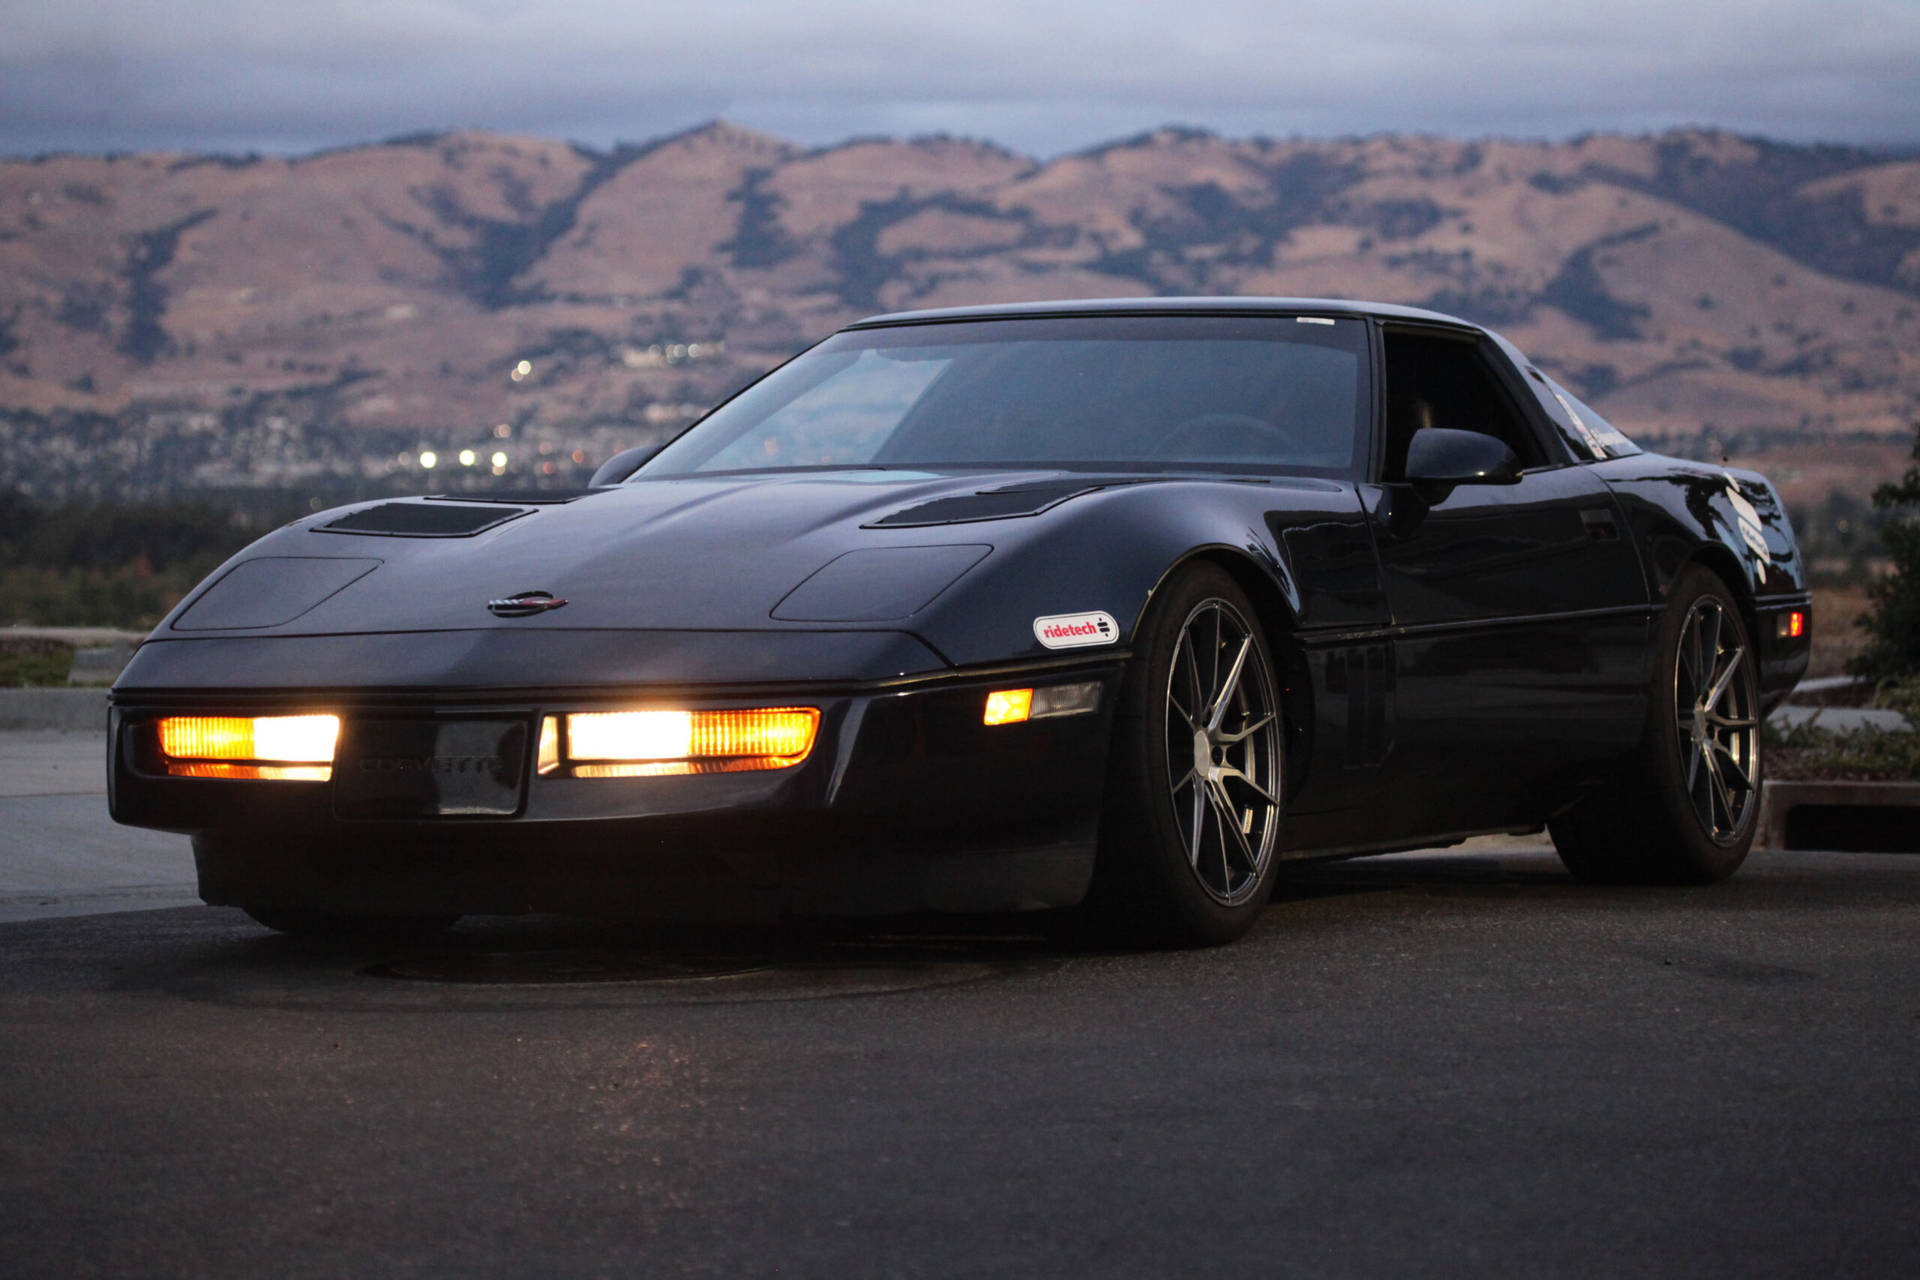 Black C4 Corvette In The Mountains Background